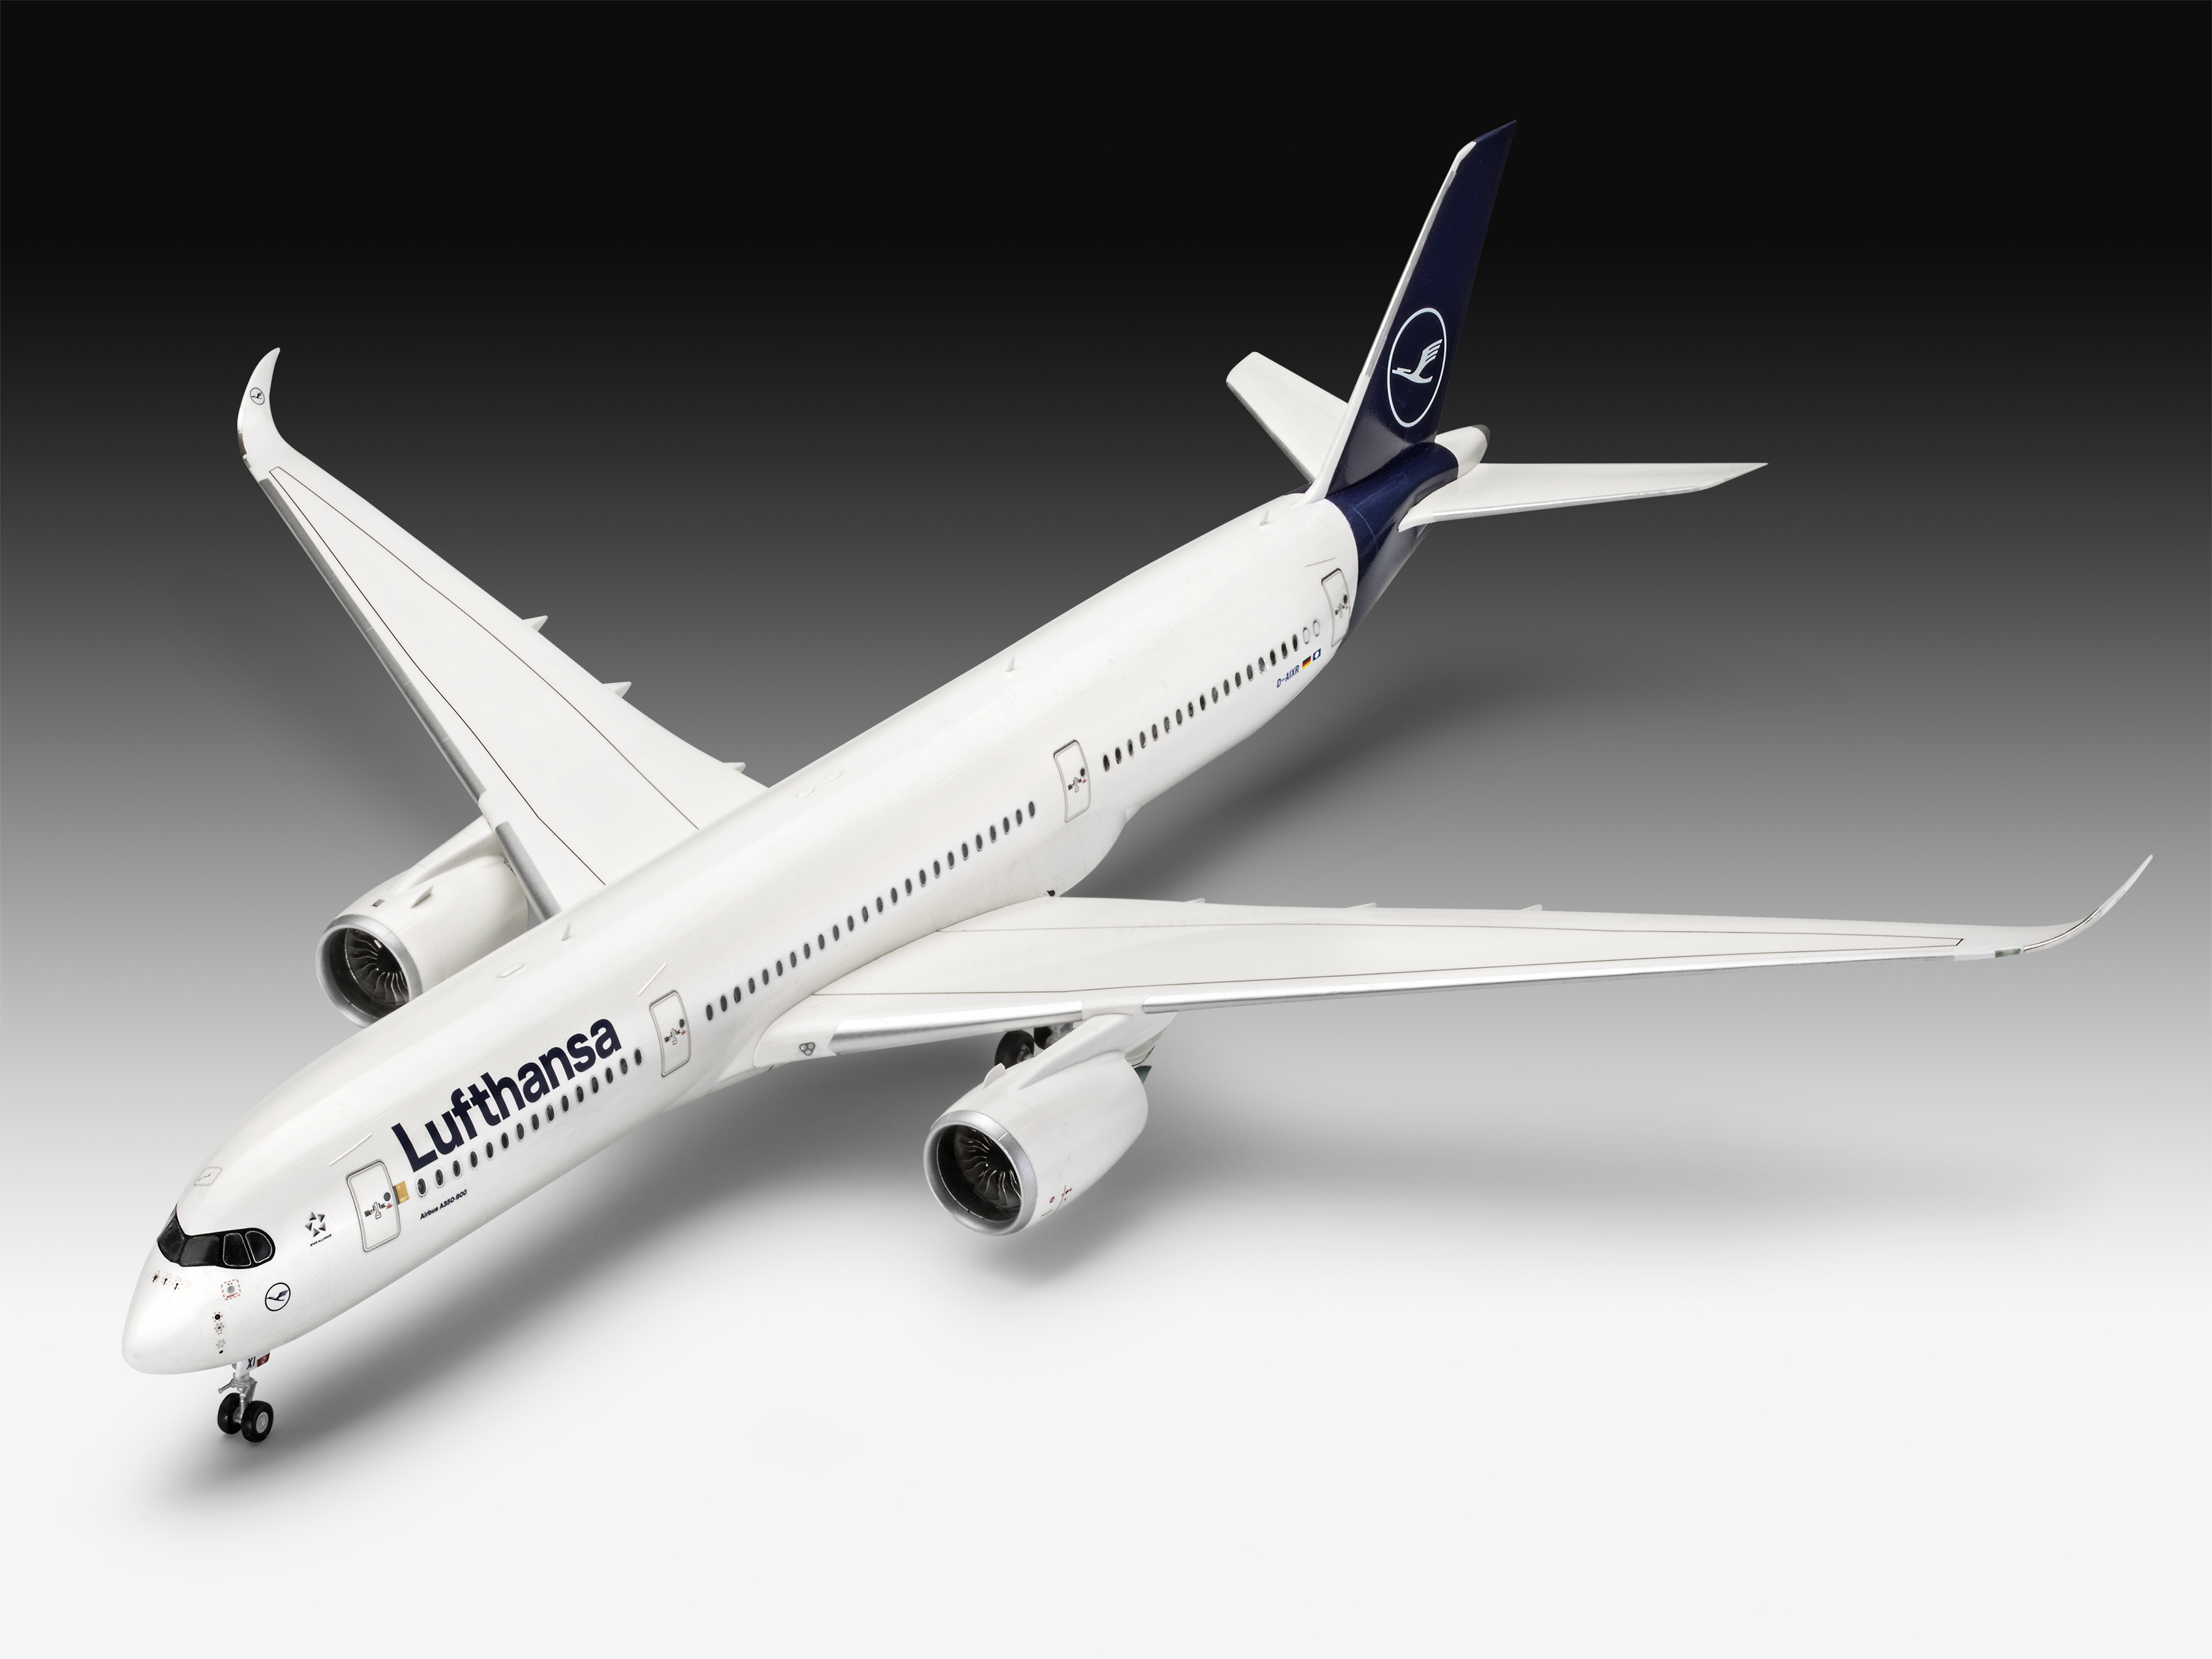 Revell Airbus A350-900 Lufthansa New Livery in 1:144 bouwpakket